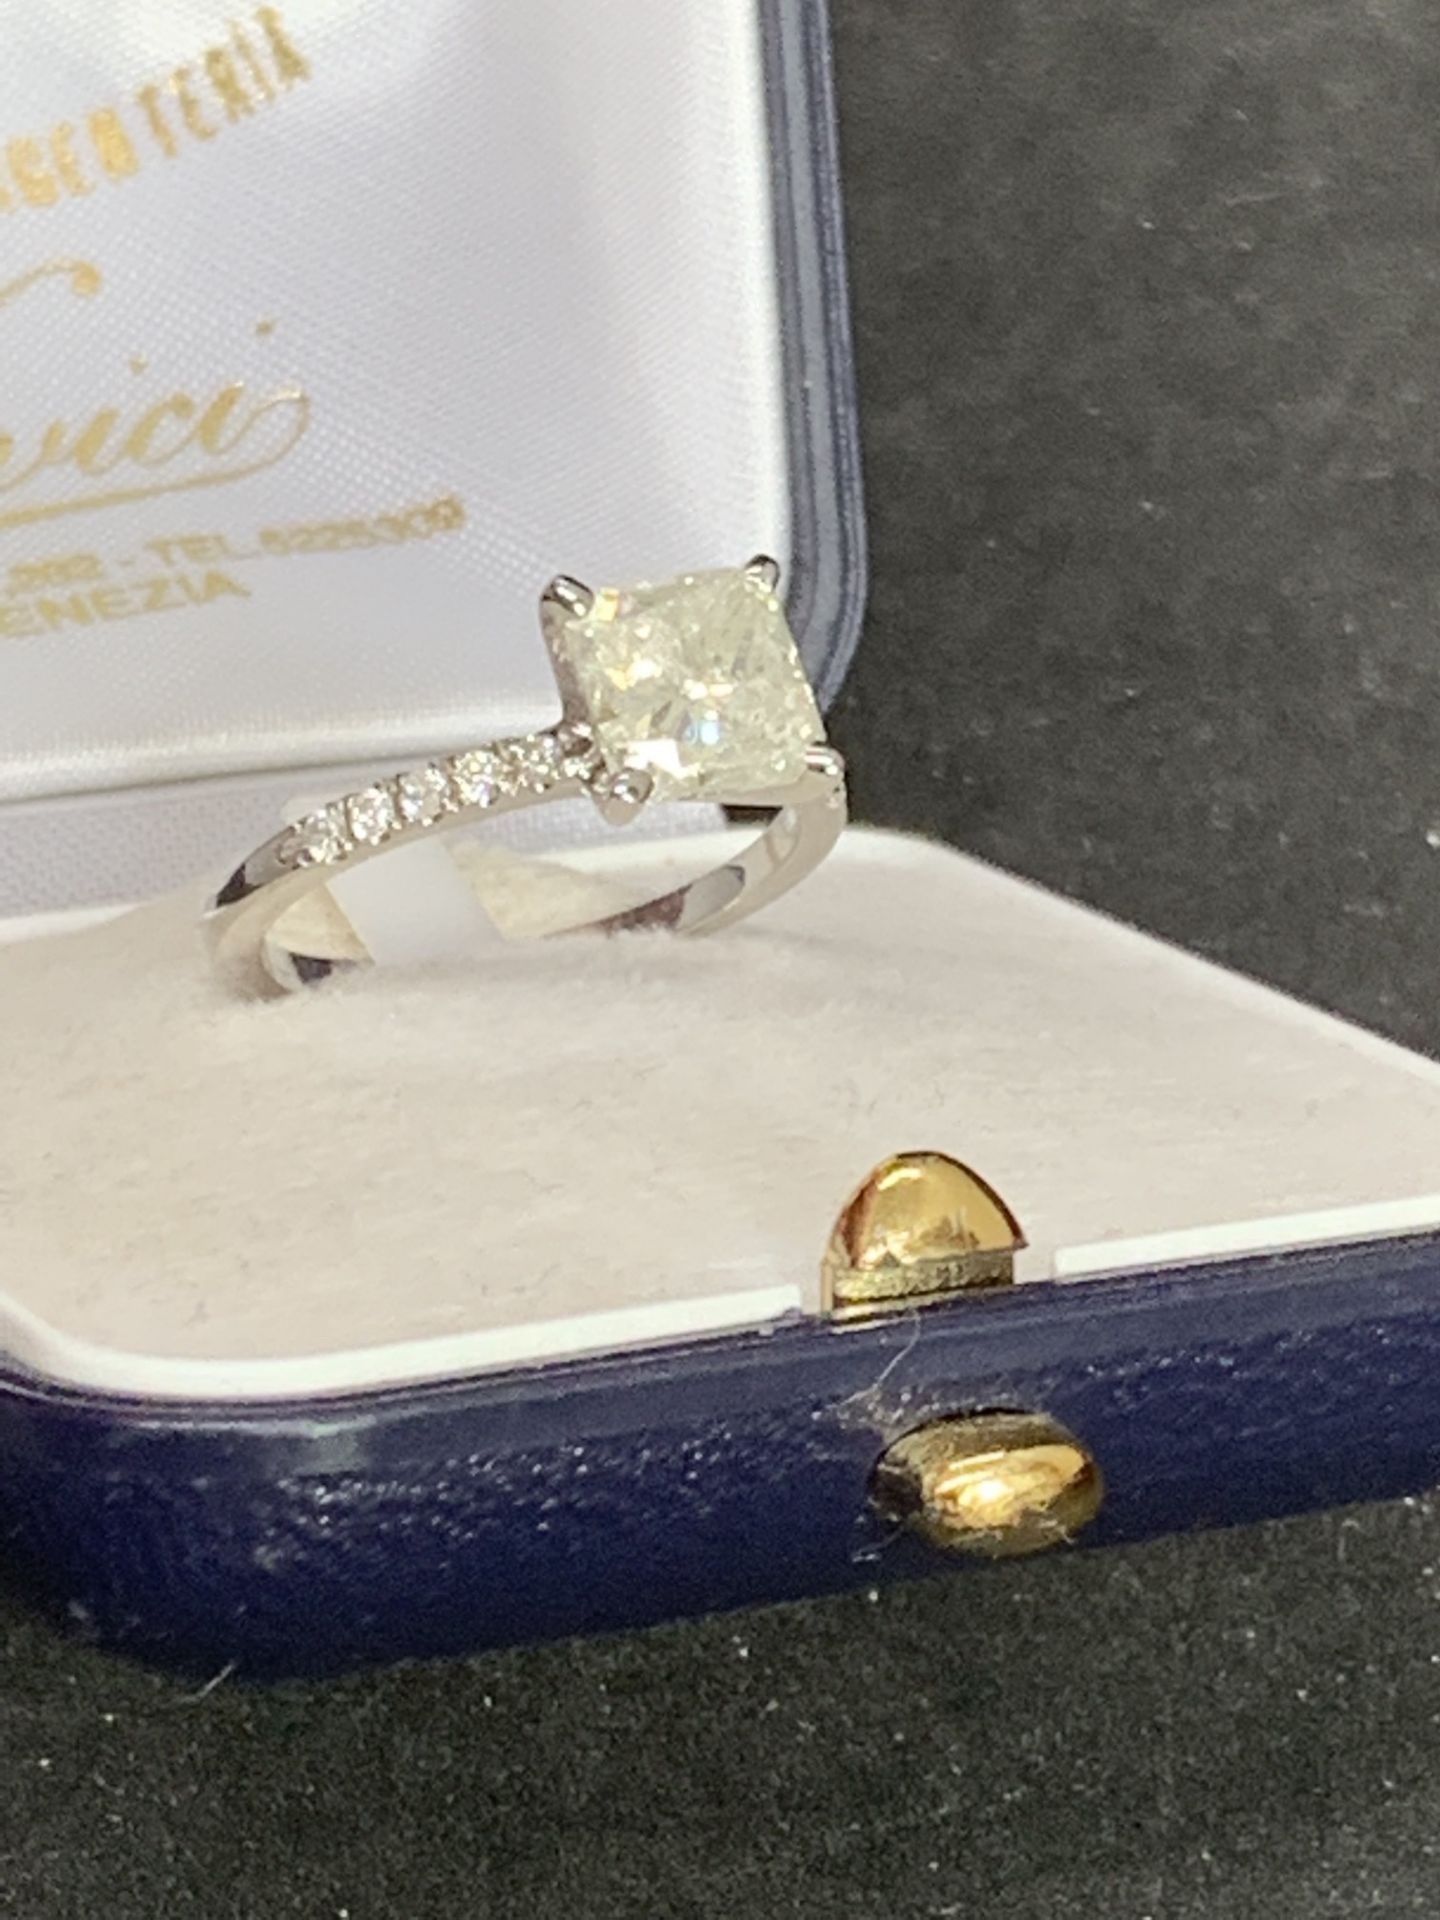 2.10ct RADIANT CUT DIAMOND SOLITAIRE RING SET IN WHITE METAL TESTED AS WHITE GOLD - Image 4 of 6